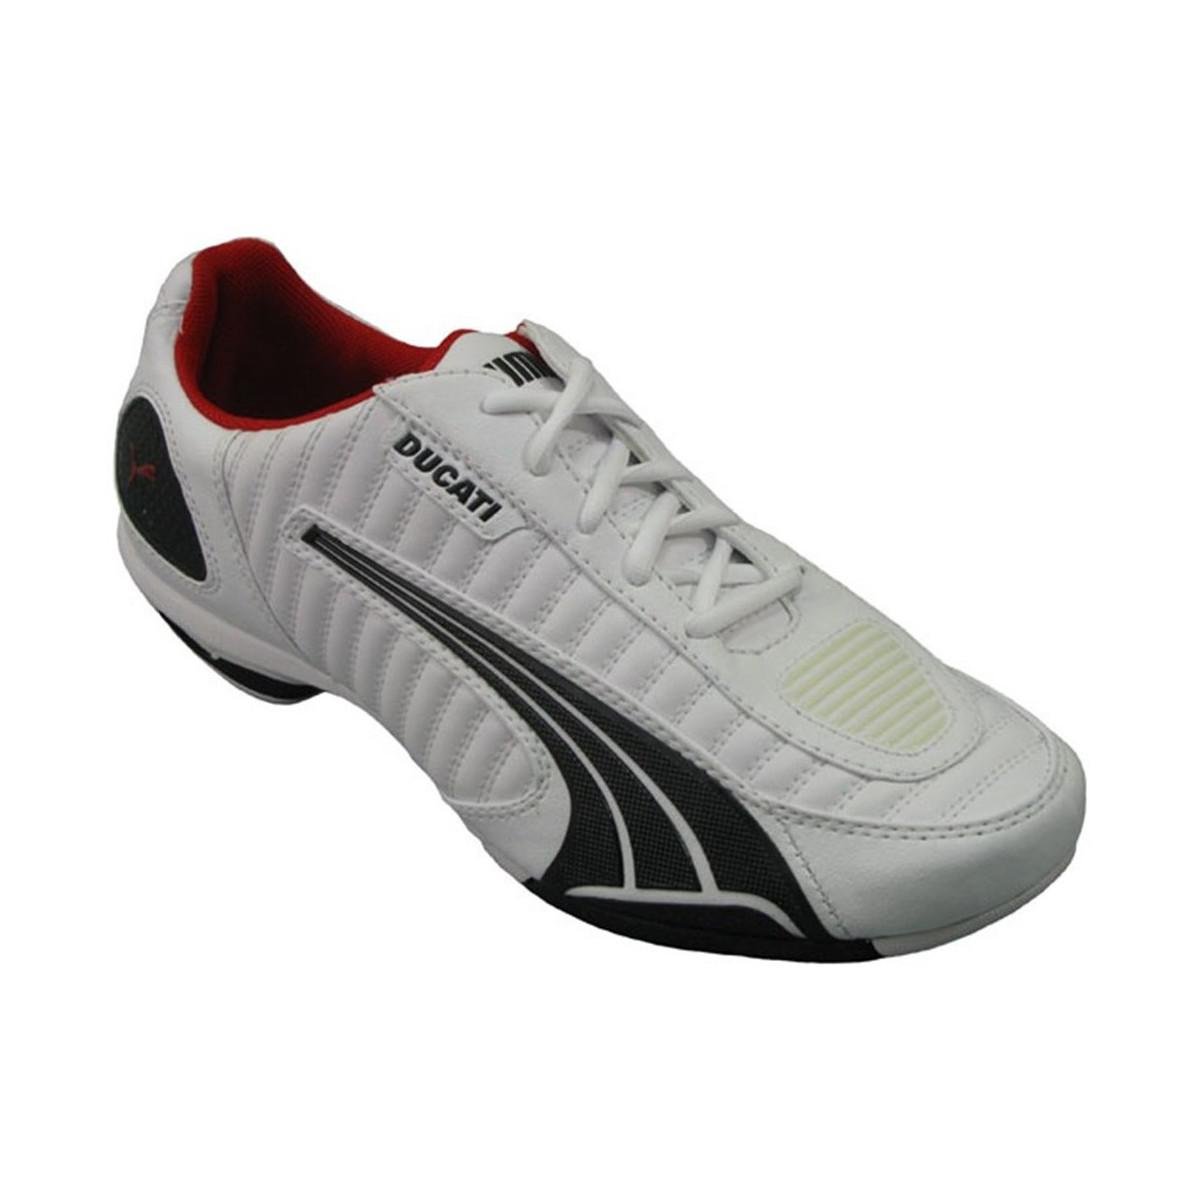 PUMA Ducati Ltwin Men's Shoes (trainers) In White for Men - Lyst